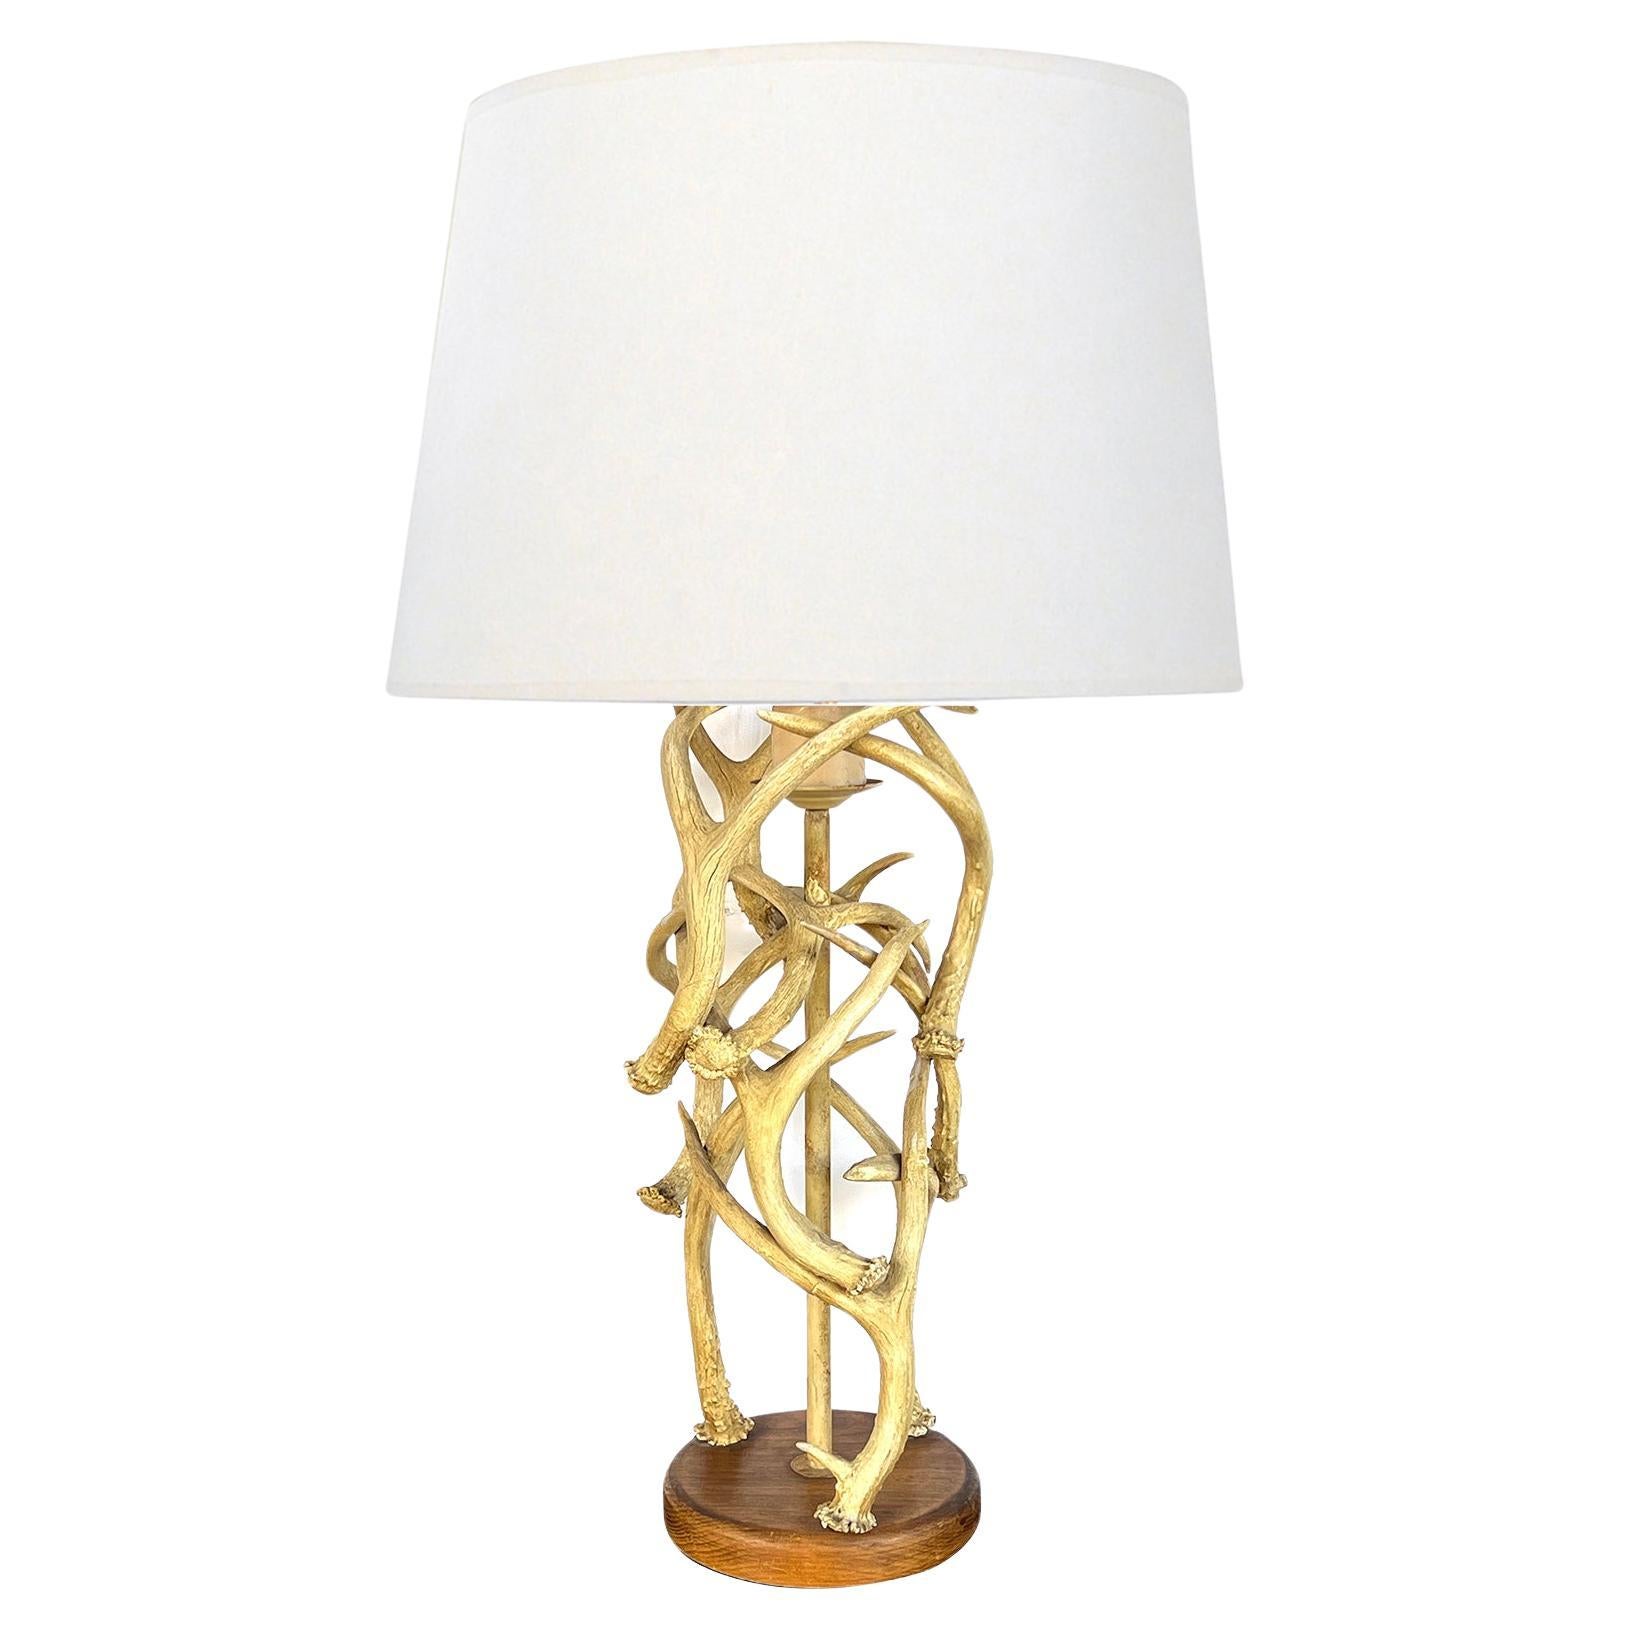 A Rustic Antler-Form Table Lamp For Sale